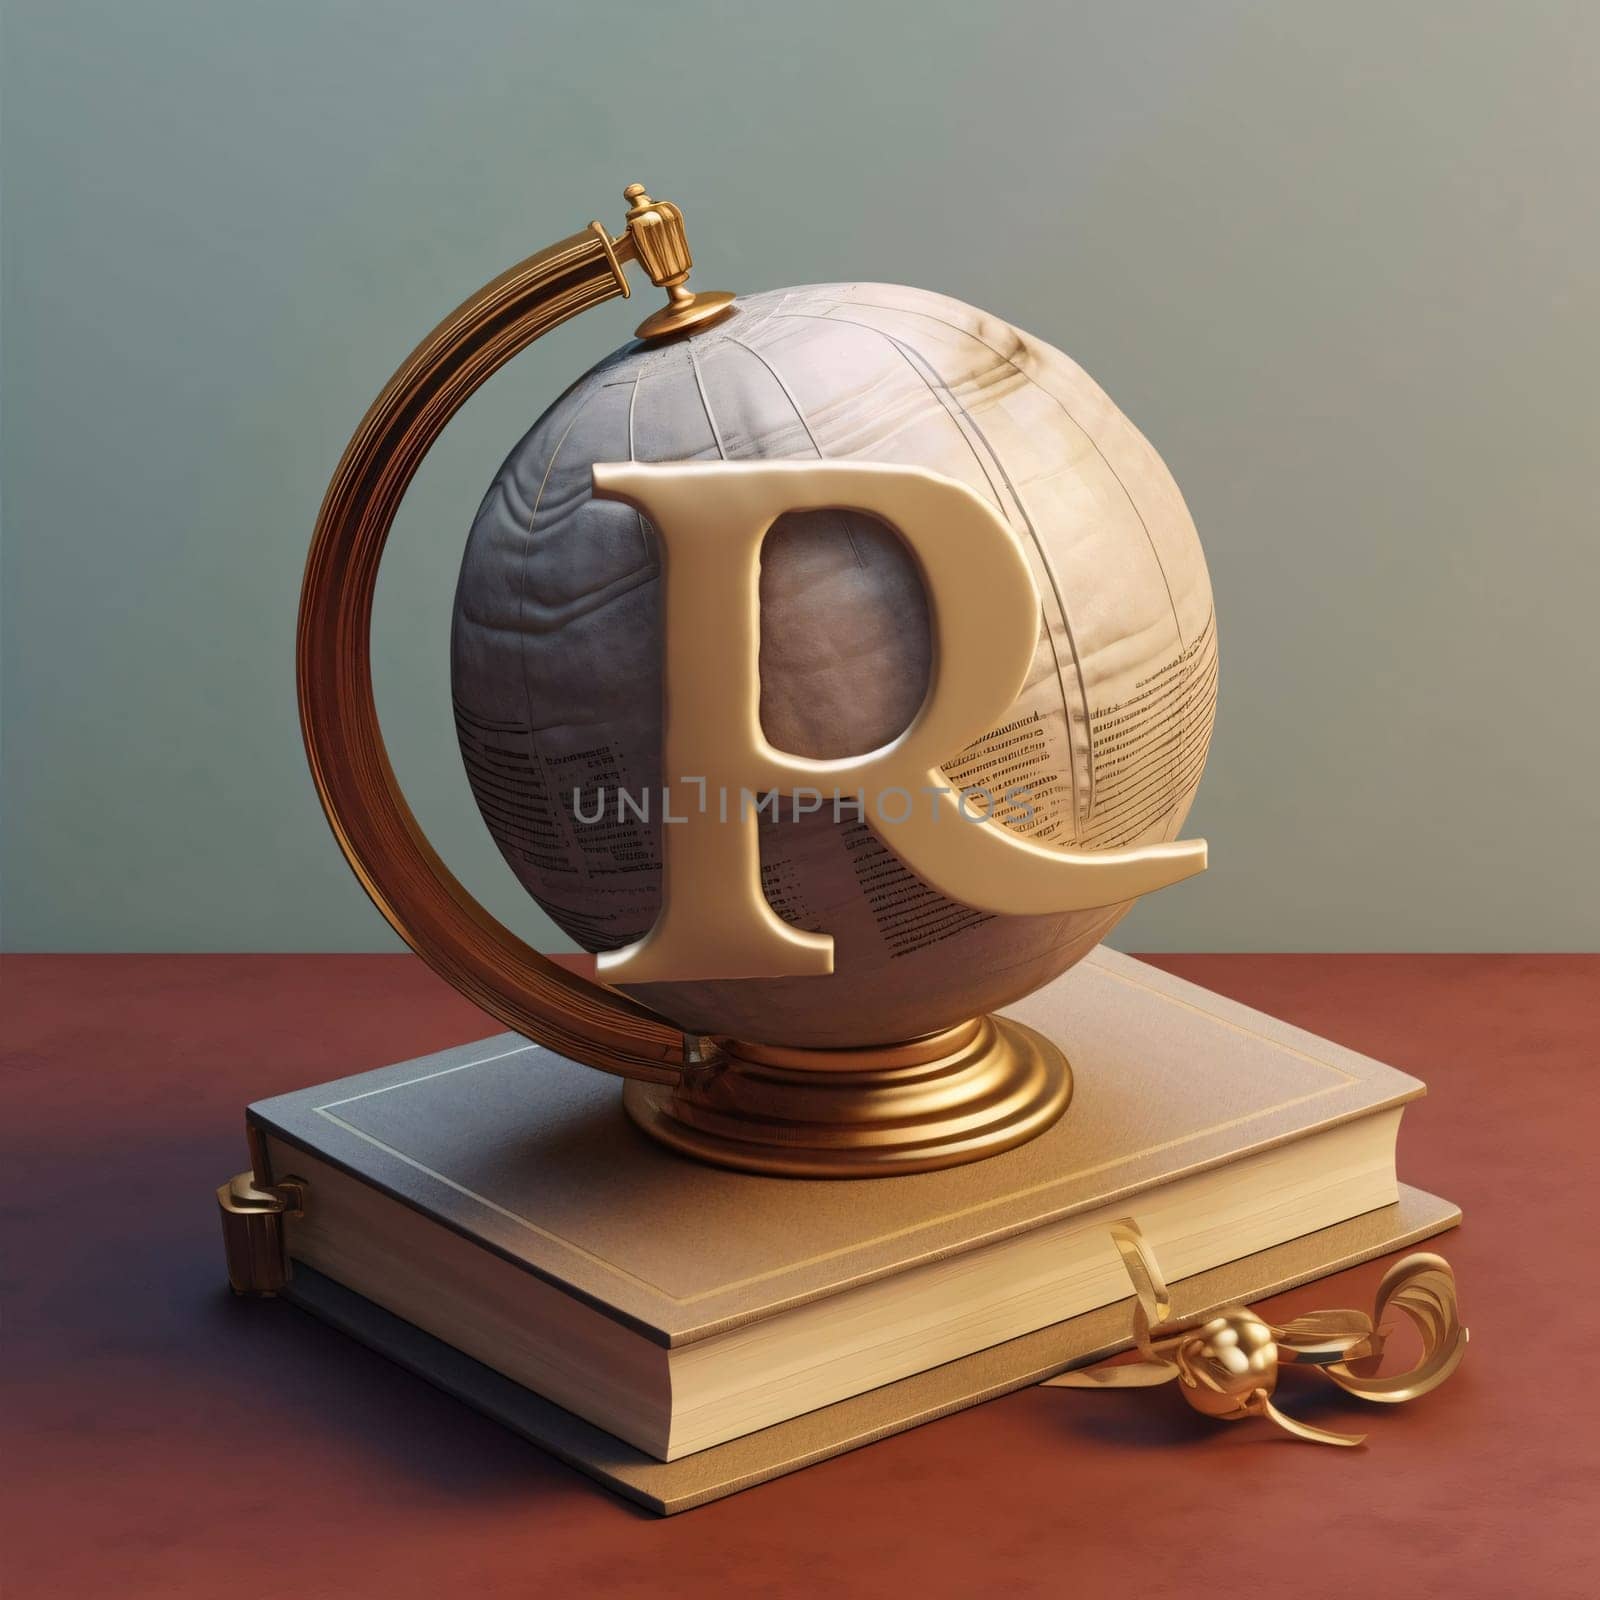 Graphic alphabet letters: The letter R in the alphabet on the globe. 3D rendering